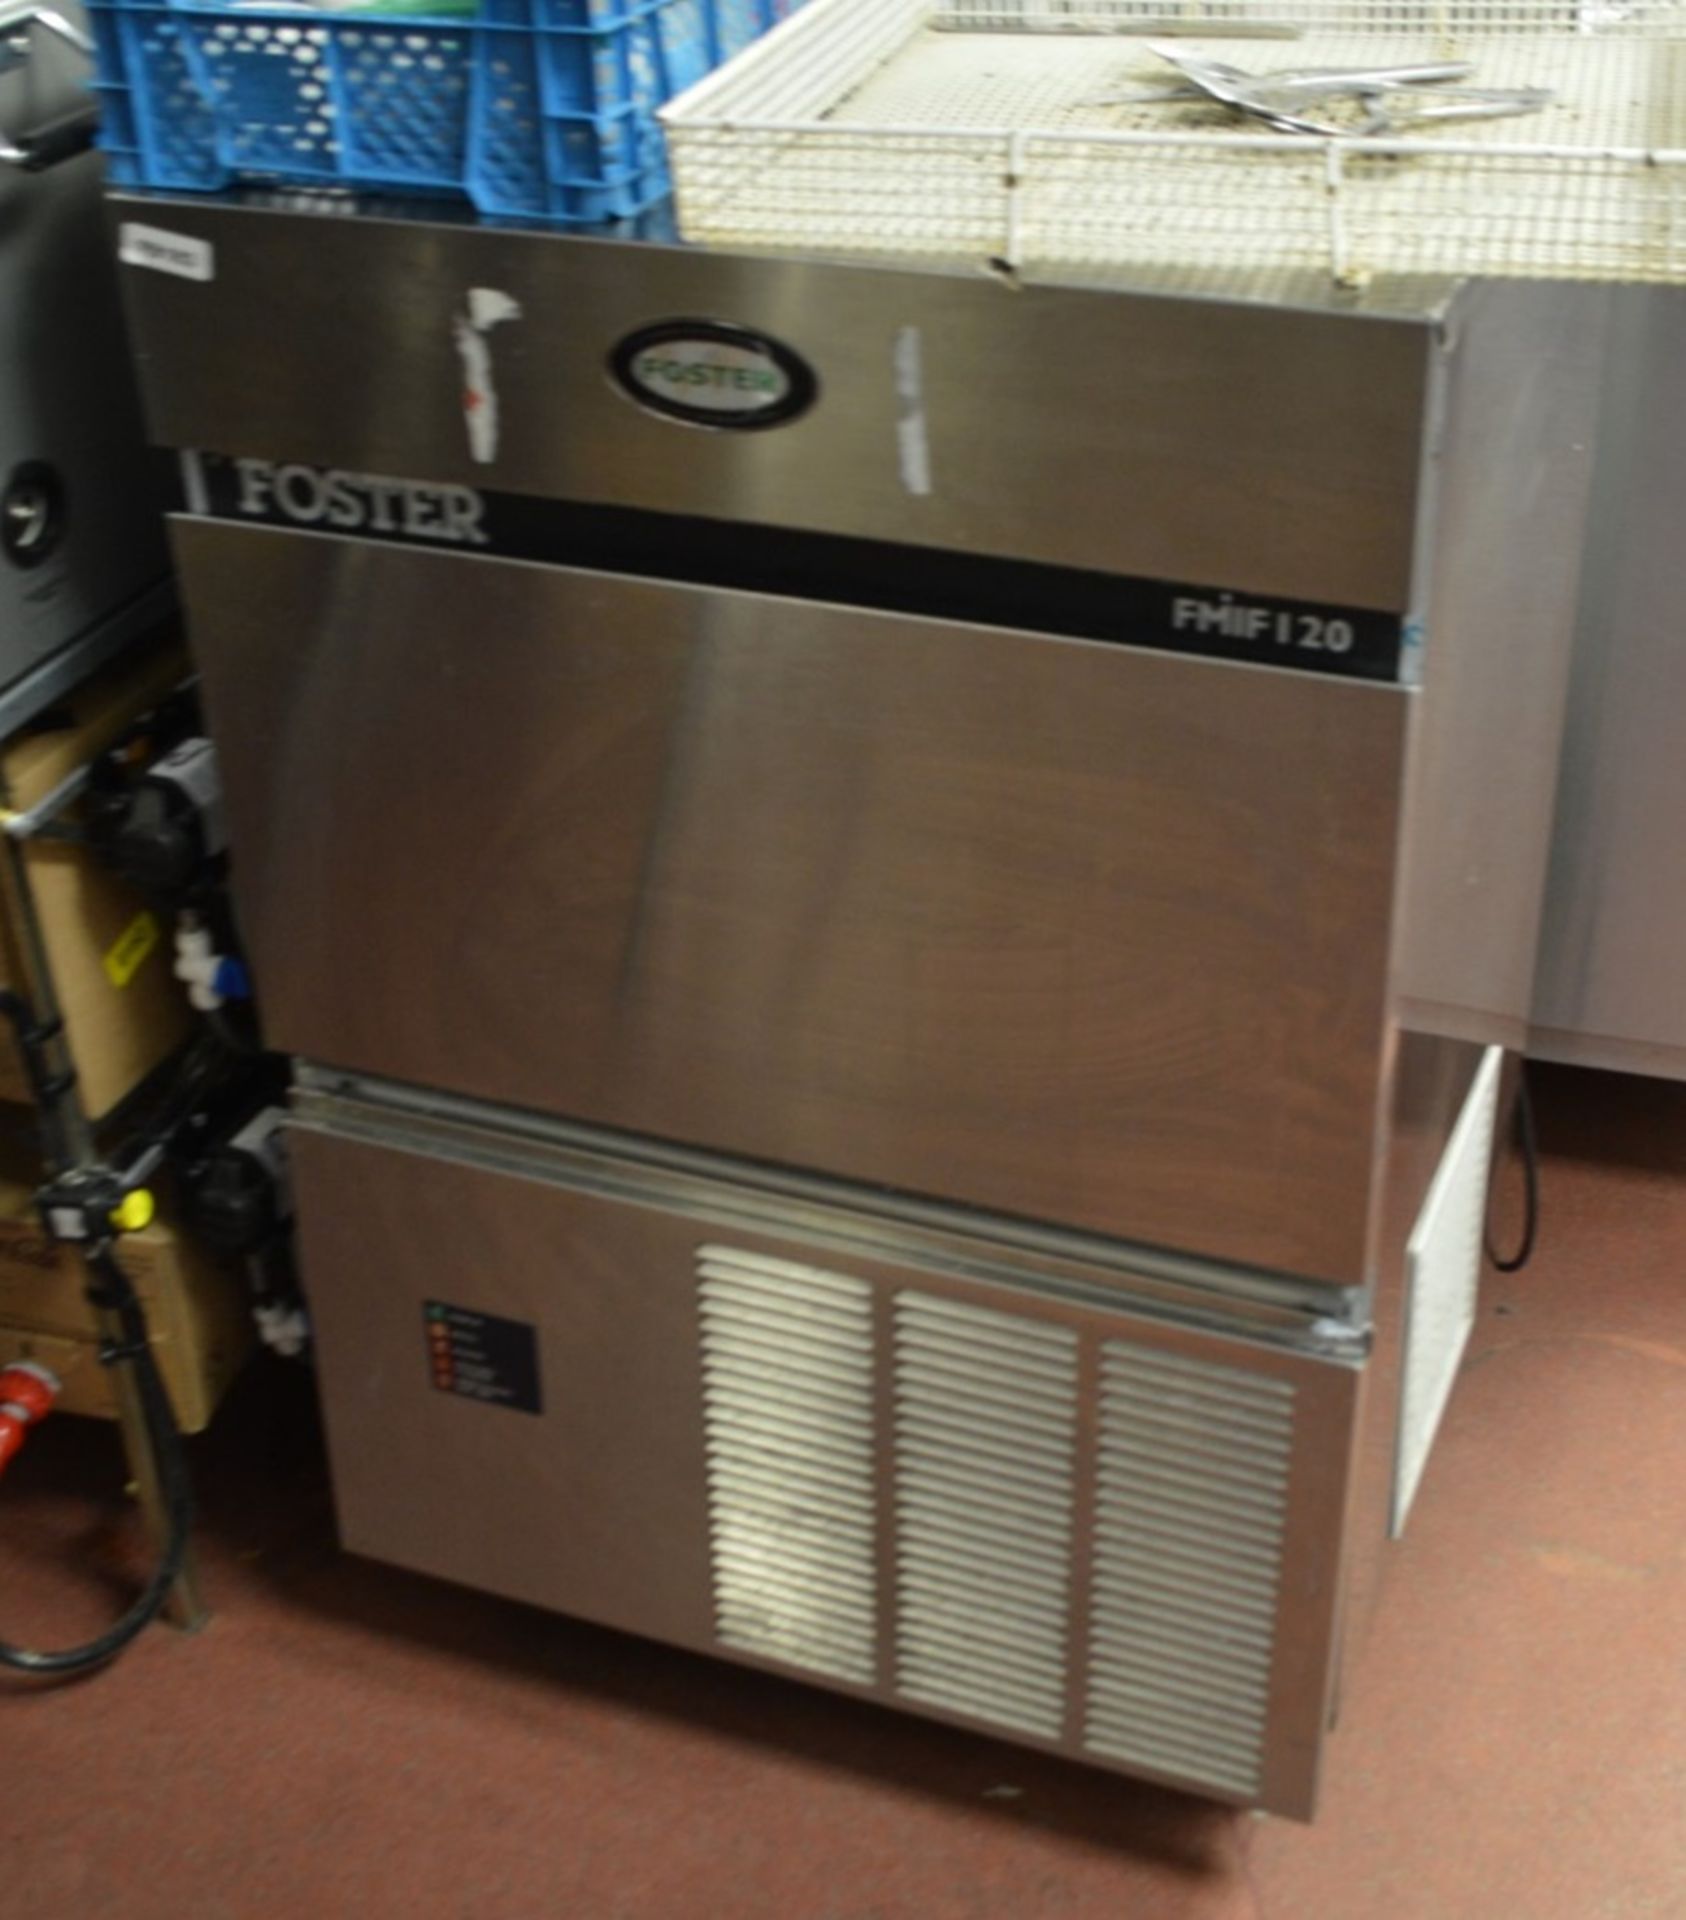 1 x Foster FMIF120 130kg Output Ice Flaker With Stand - H120 x W70 x D50 cms - RRP £3,900 - Ref - Image 3 of 5